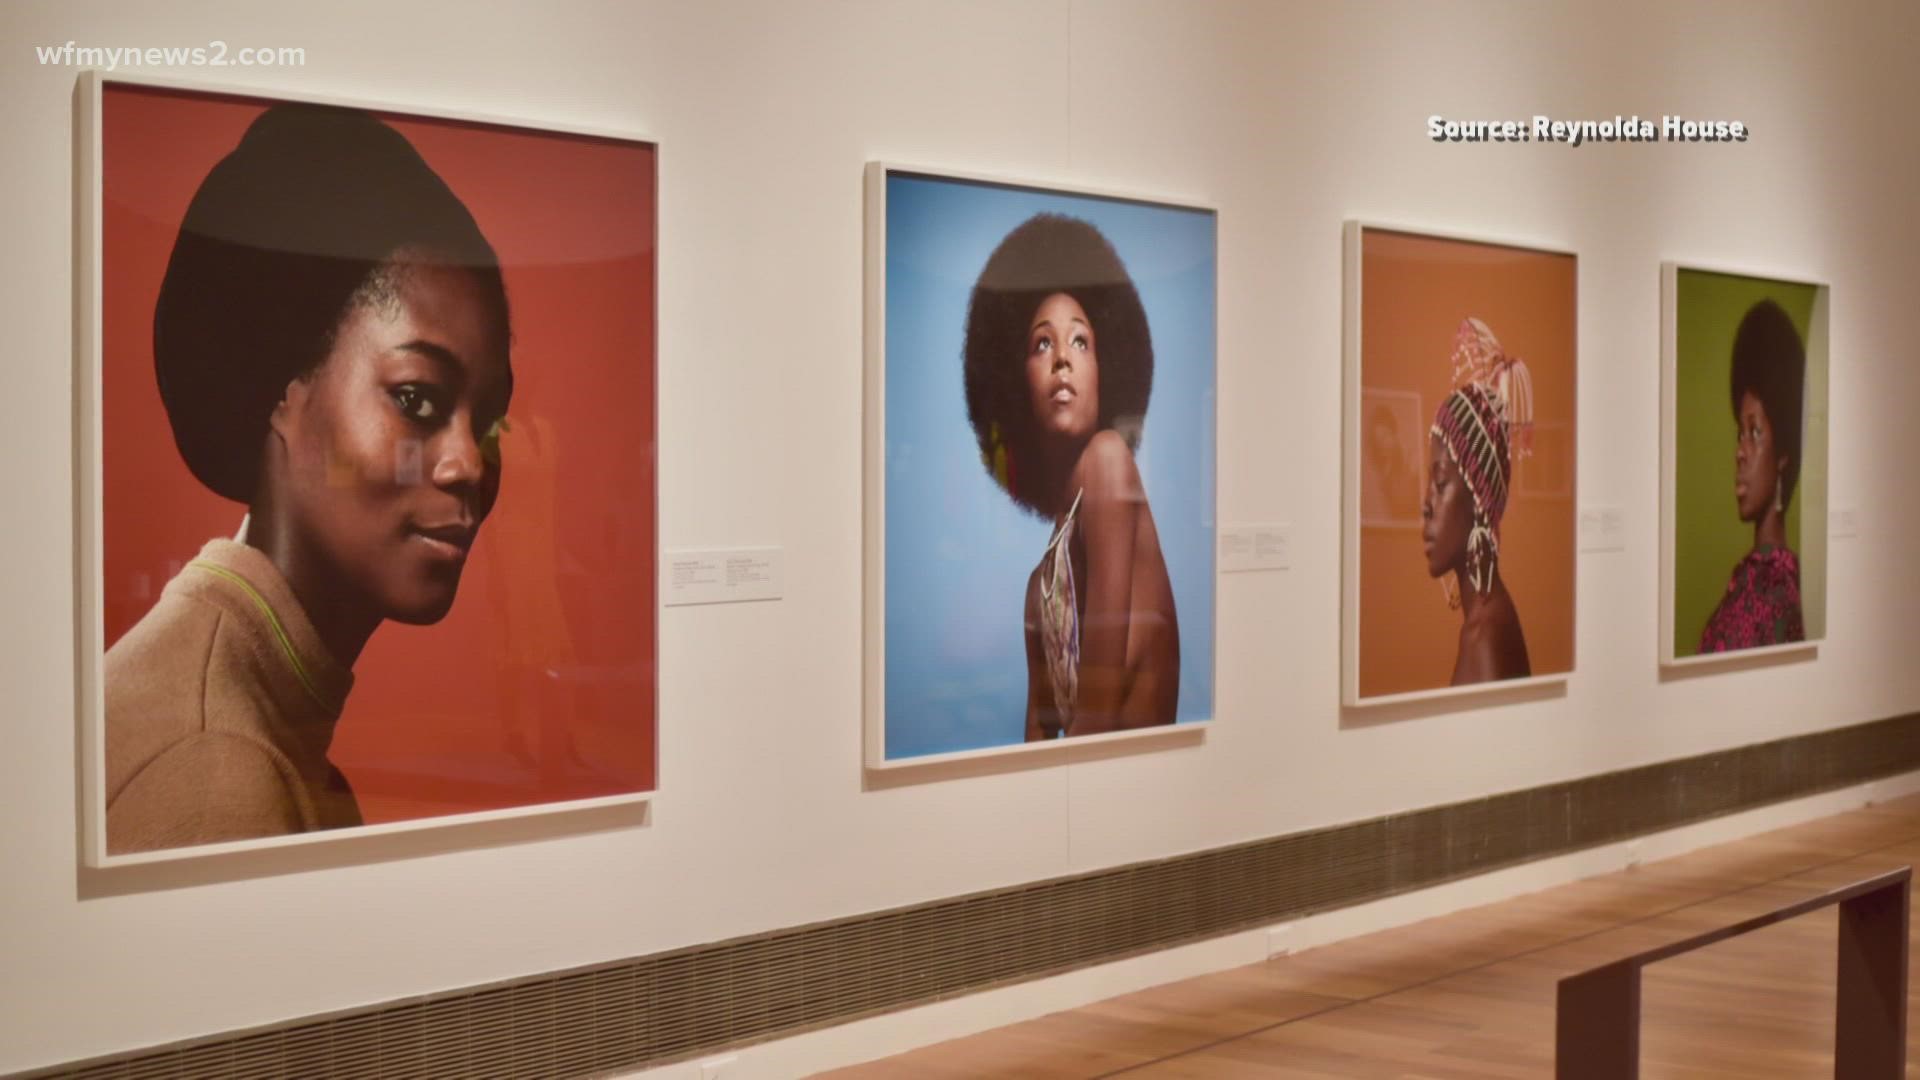 To celebrate Black History Month, the Reynolda House Museum for American Art is exhibiting “Black is Beautiful.”